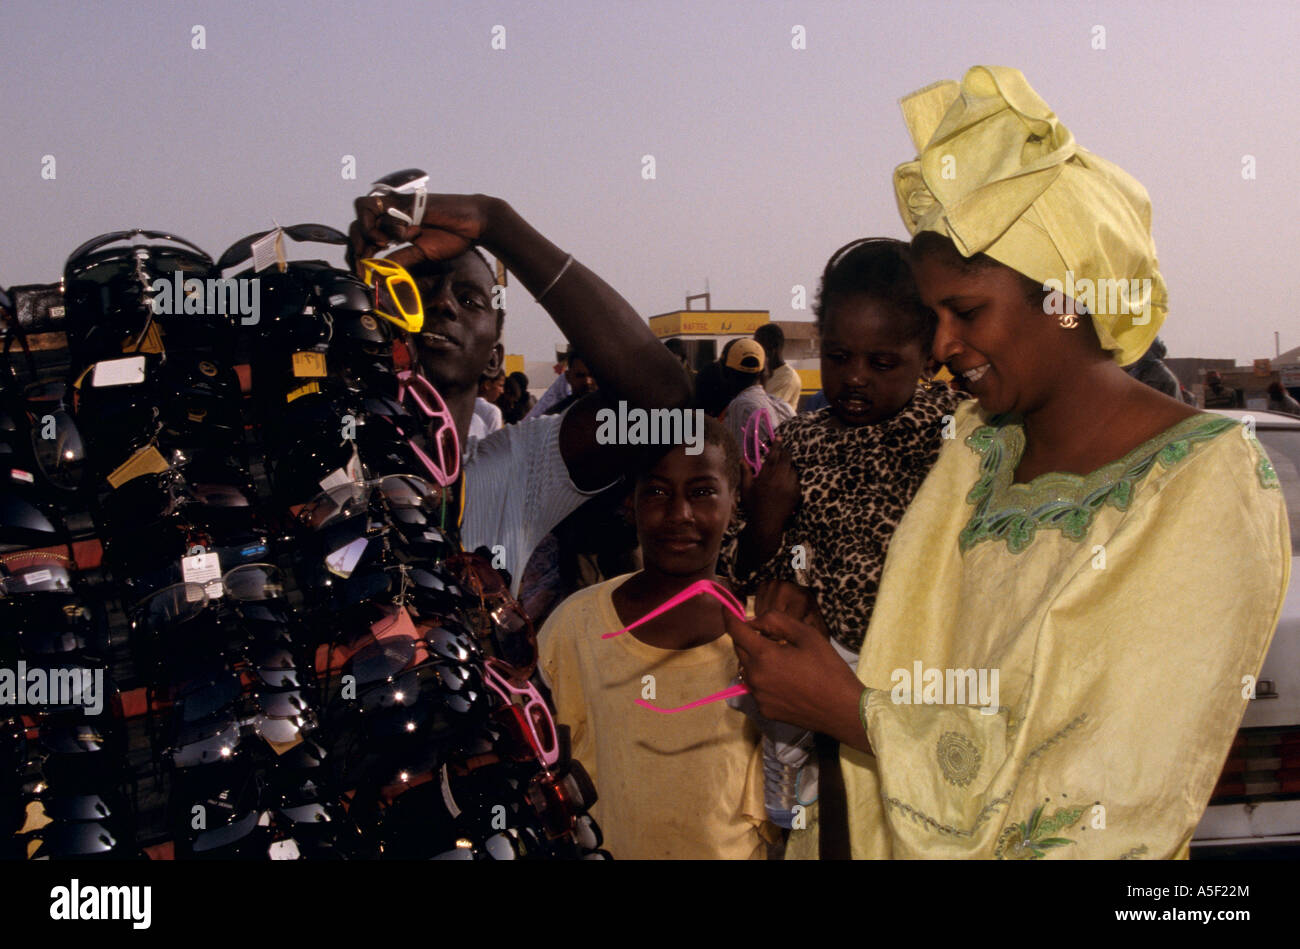 Woman in traditional clothing shopping for sunglasses from market stall, Nouakchott,  Mauritania, Africa Stock Photo